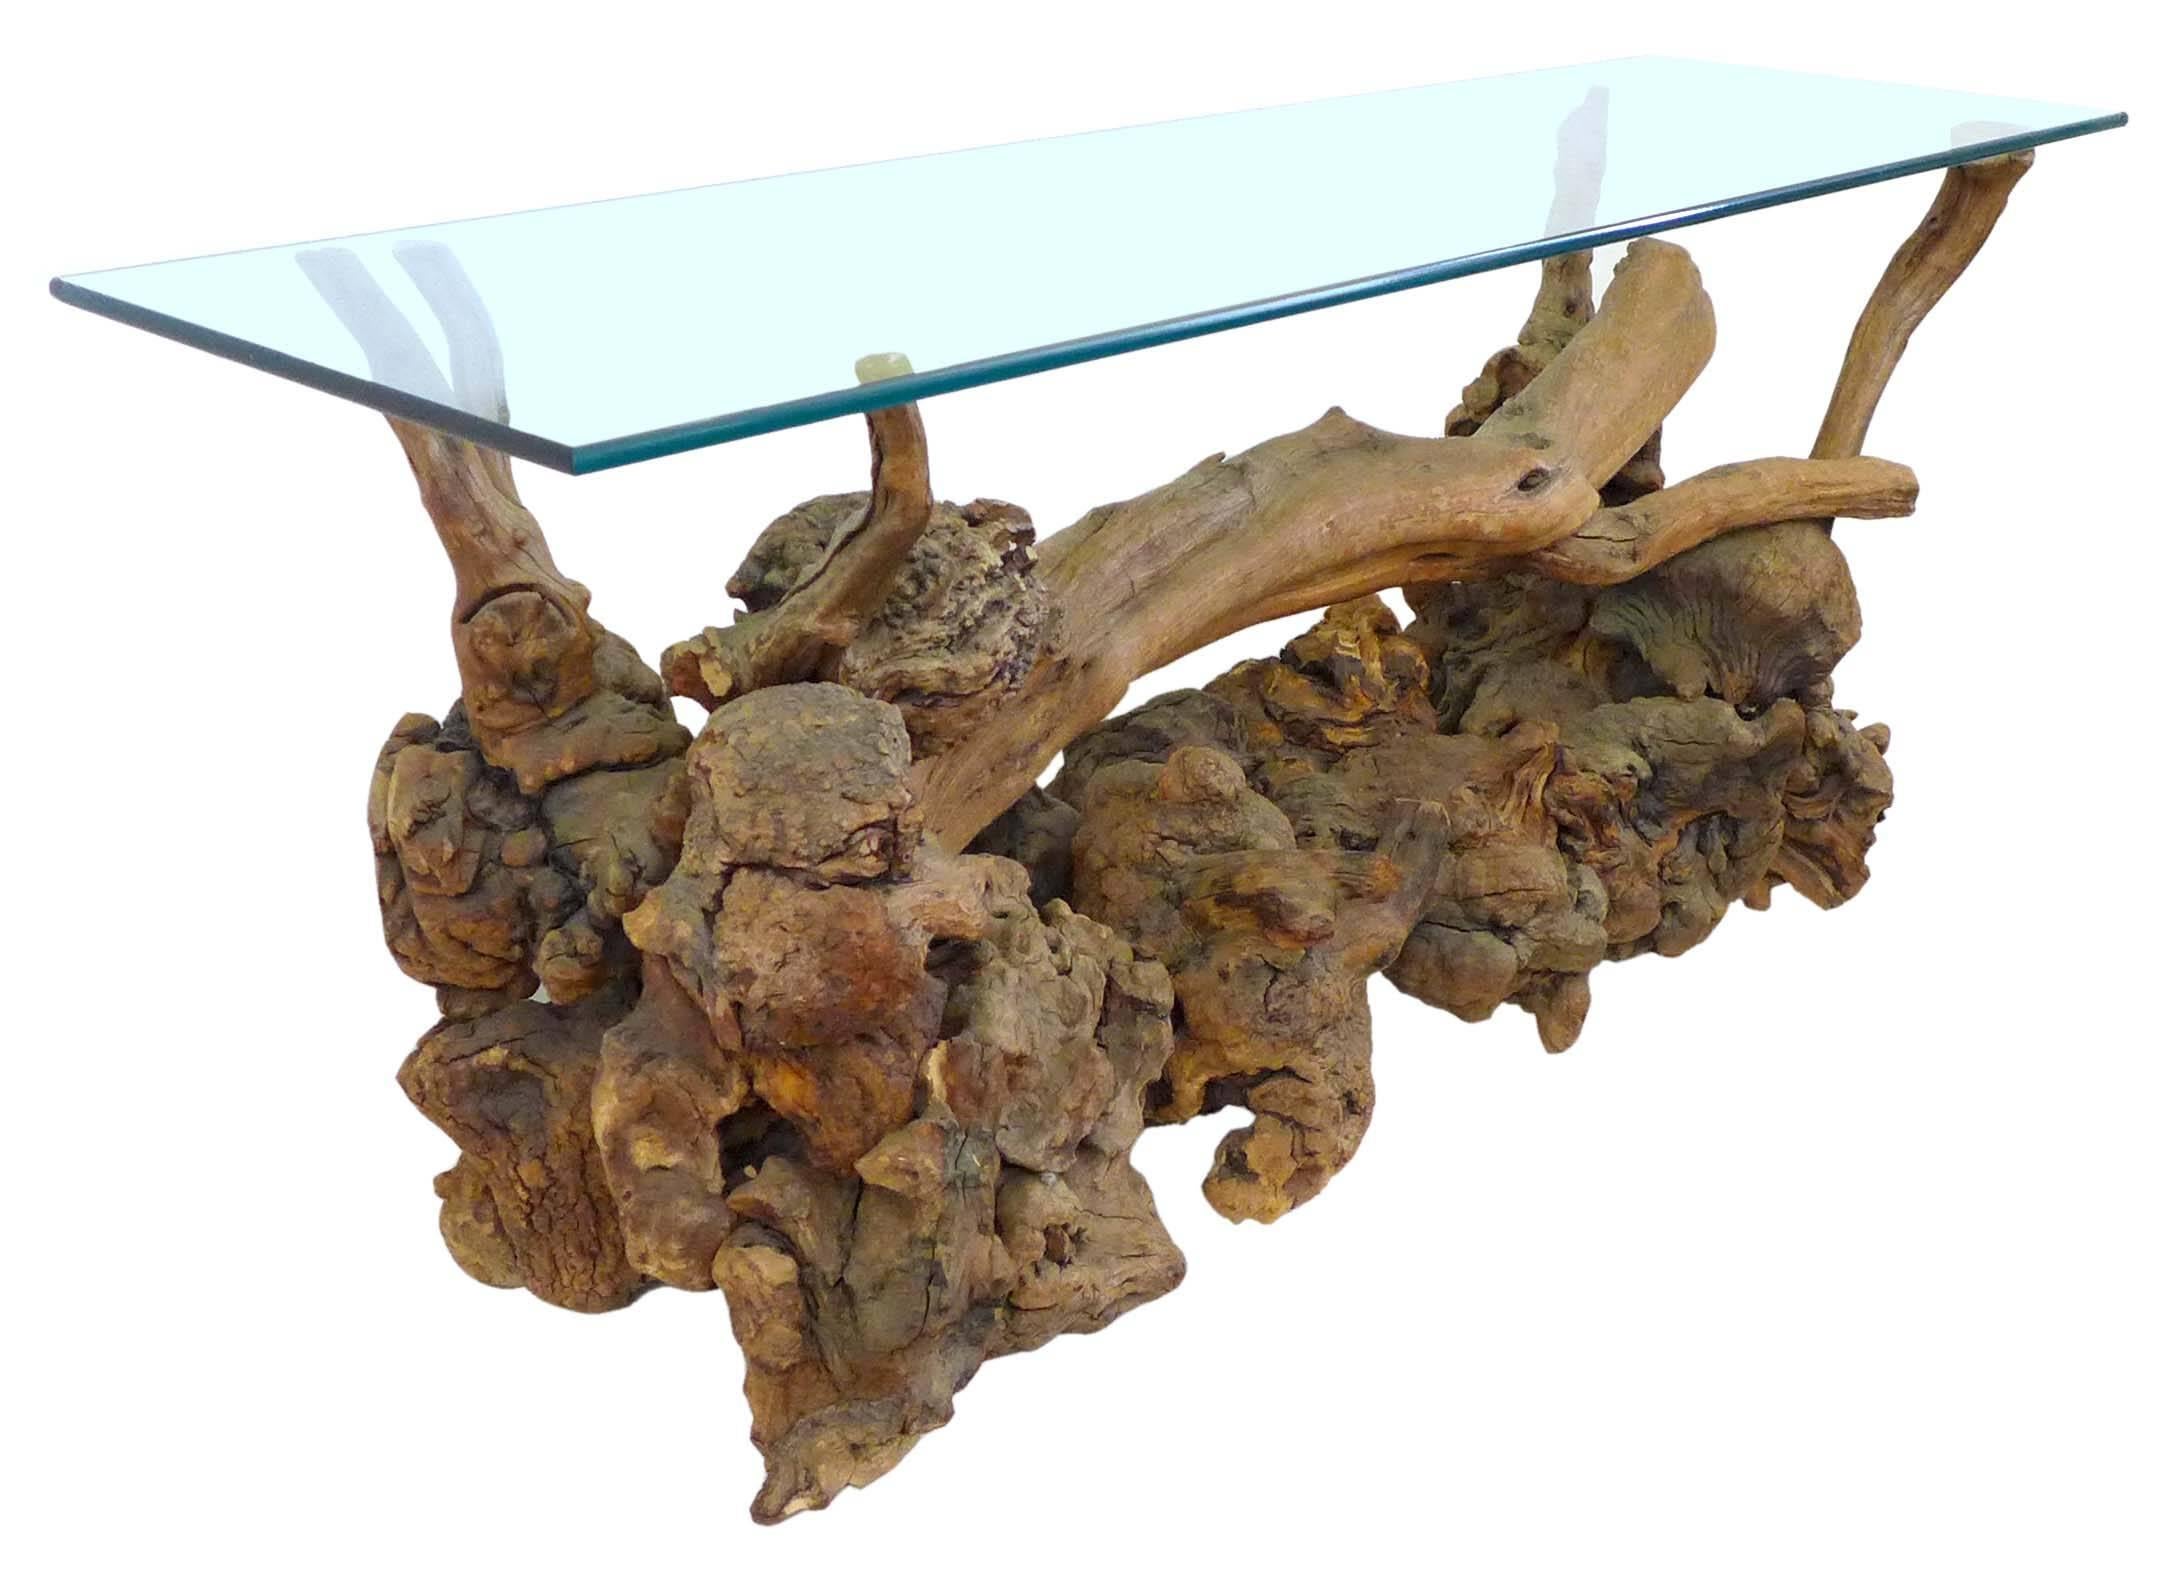 A fantastic burl and driftwood glass-top console table.  Assembled from multiple pieces of burl and driftwood fragments.  The wood has been pinned together with steel rods to create a great example of organic design.  Original rectangular glass top.